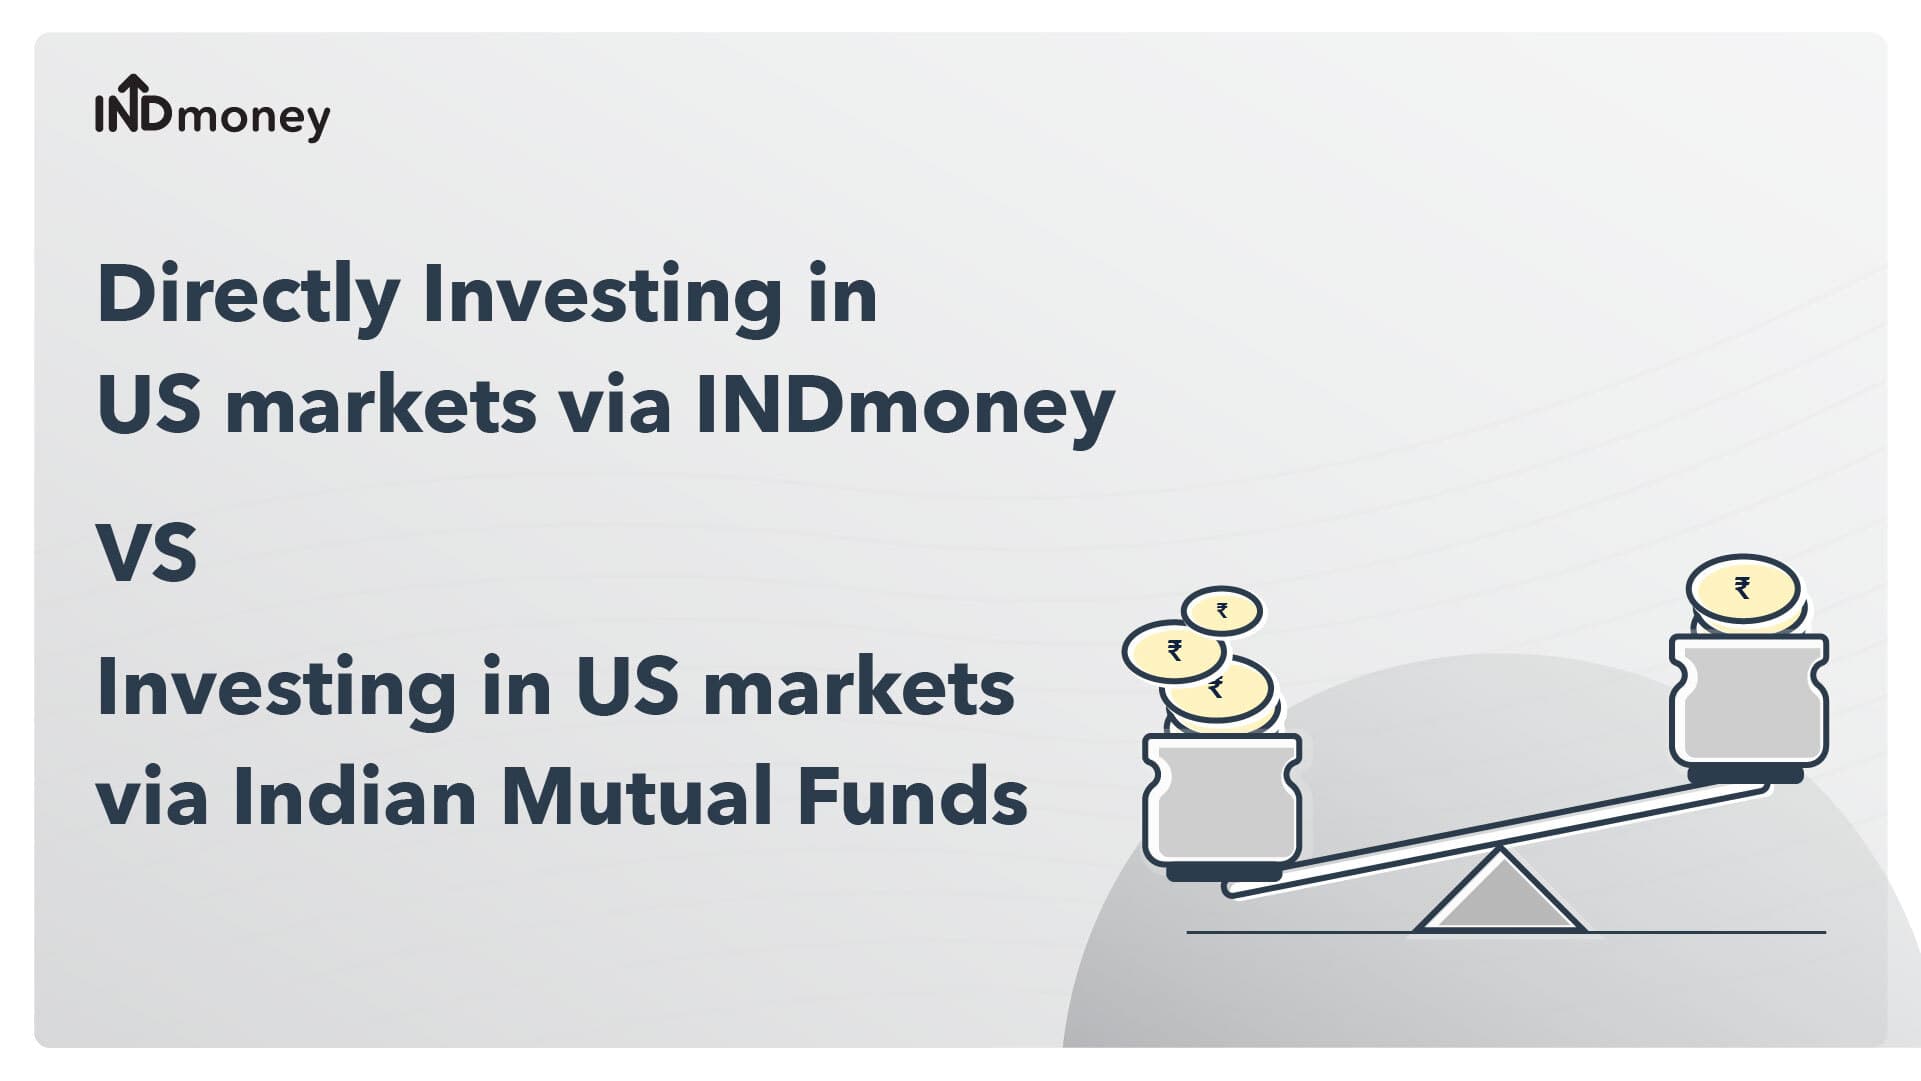 Investing directly in US Stocks and ETFs via INDmoney vs via Indian Mutual Funds